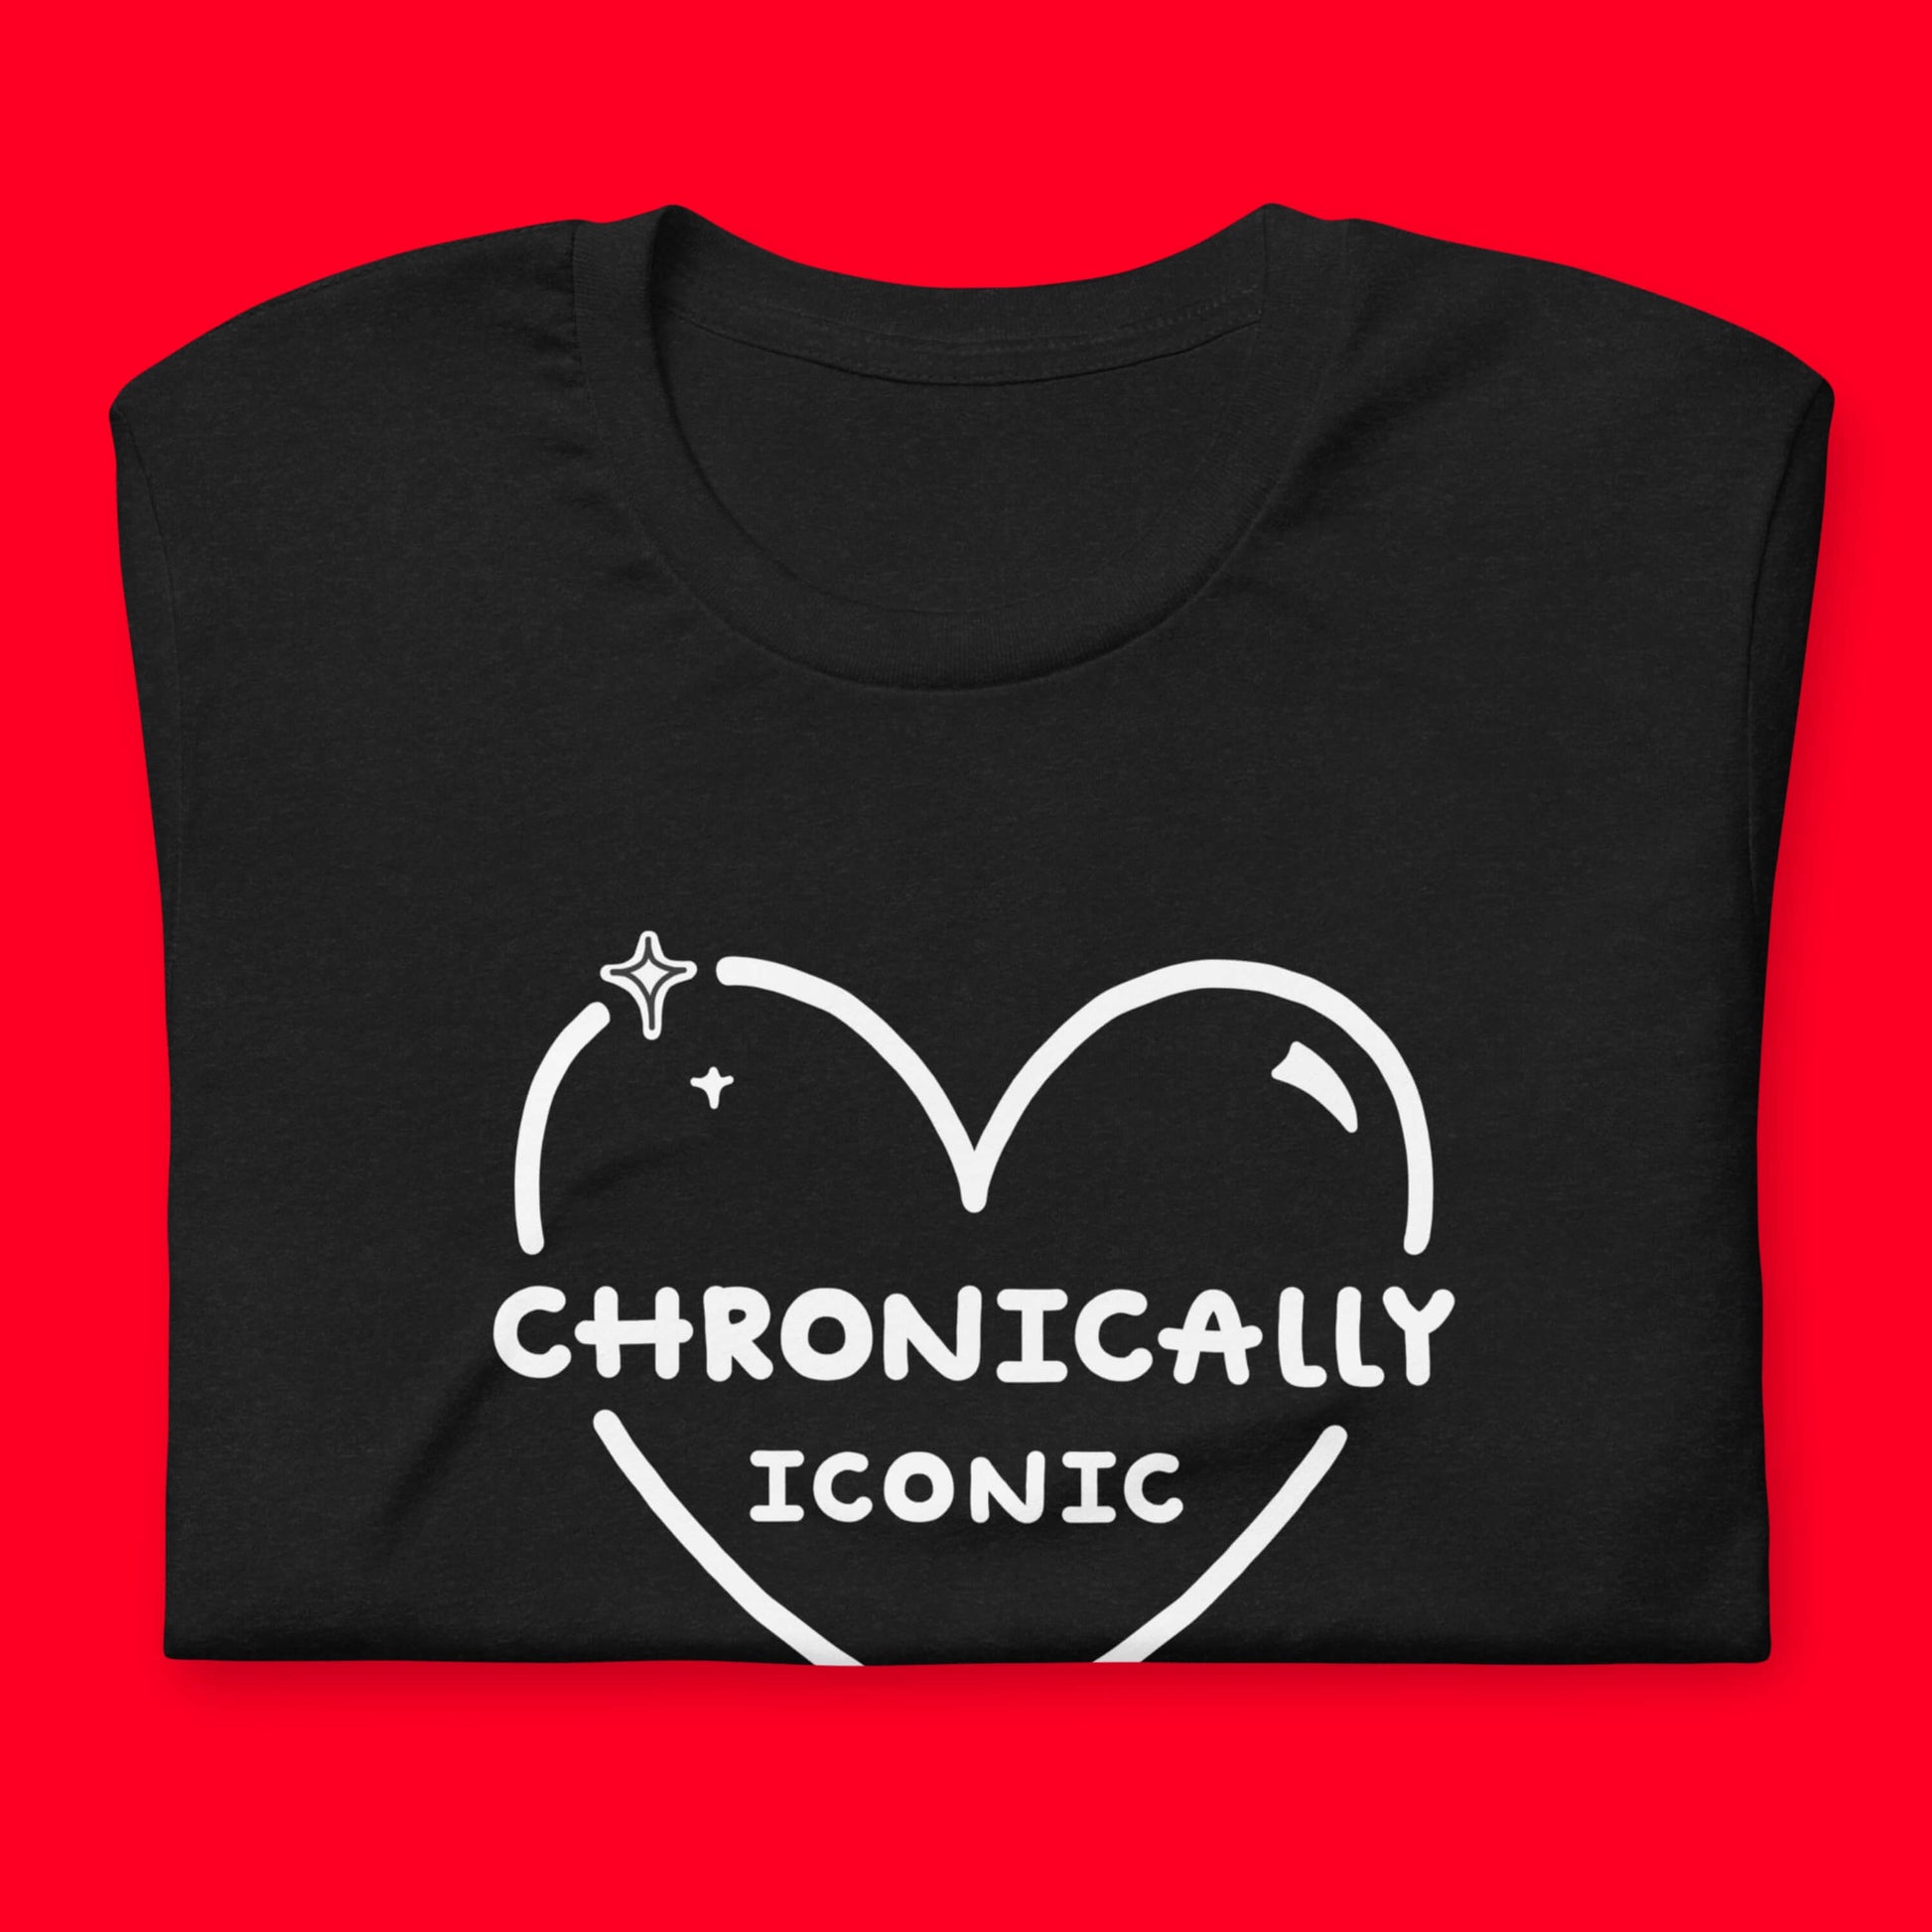 The Chronically Iconic black tee folded on a red background. The short sleeve t-shirt features a white heart outline with sparkles and centre text reading 'chronically iconic' with the innabox logo underneath. The design is raising awareness for chronic illness and invisible illness.